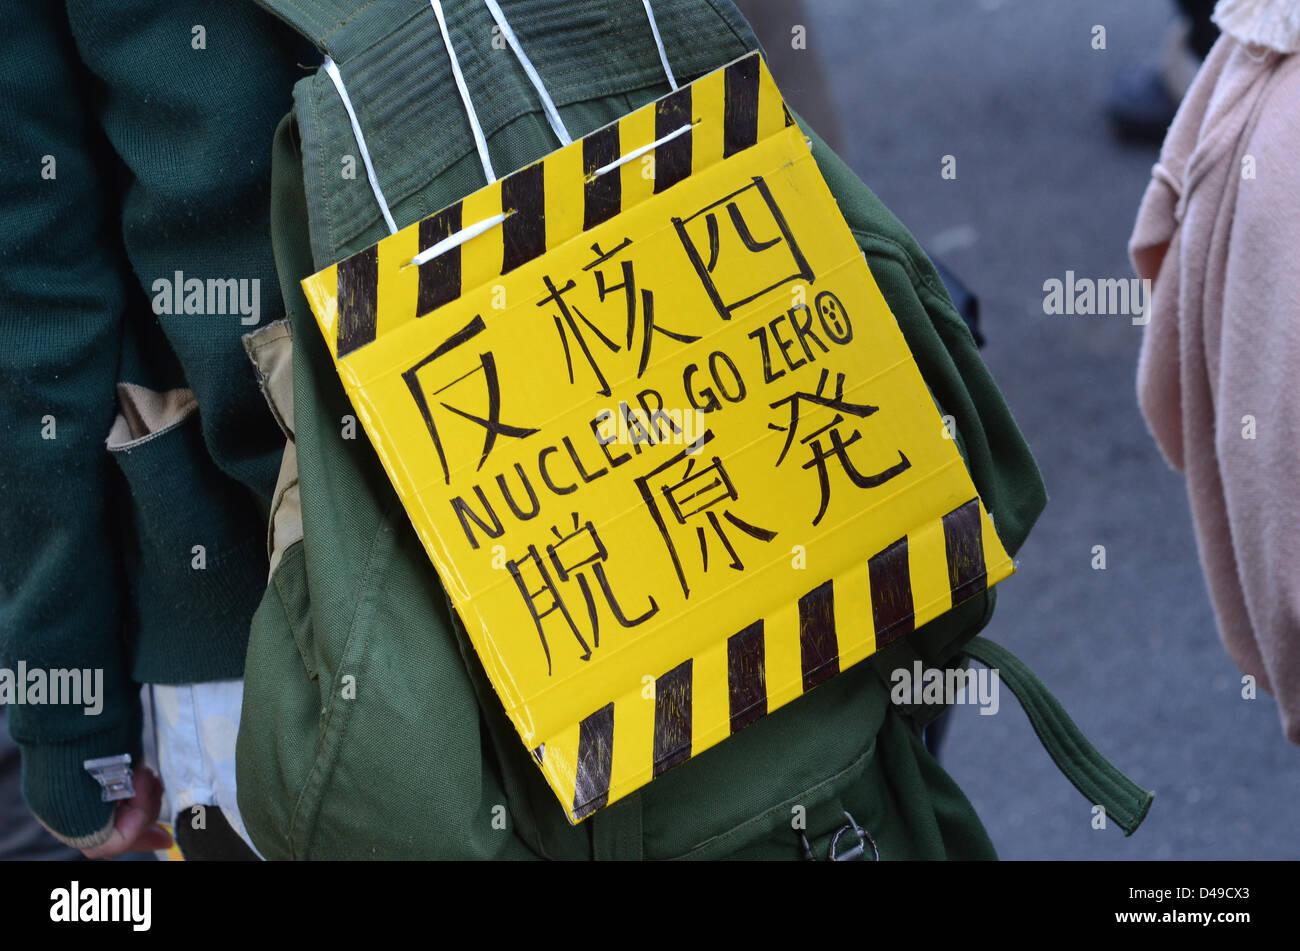 Kyoto, Japan. 9th March 2013. A banner carried during a protest march in Kyoto against the restart of the country's nuclear power stations. The protest came two days before the second anniversary of the Fukushima nuclear disaster. Credit:  Trevor Mogg / Alamy Live News Stock Photo